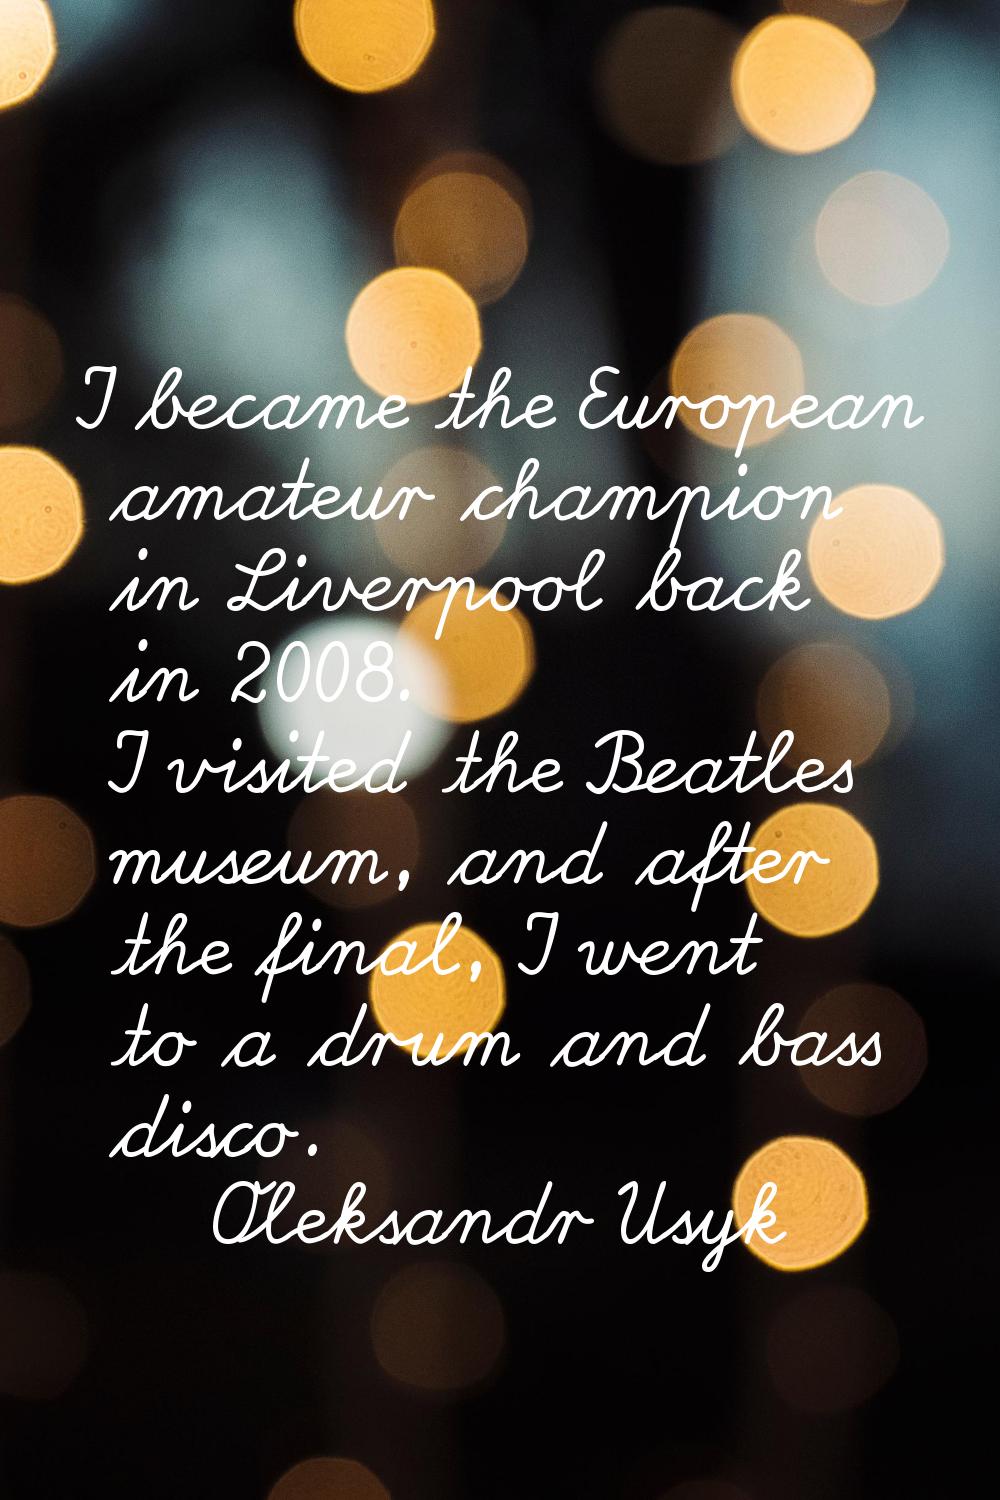 I became the European amateur champion in Liverpool back in 2008. I visited the Beatles museum, and